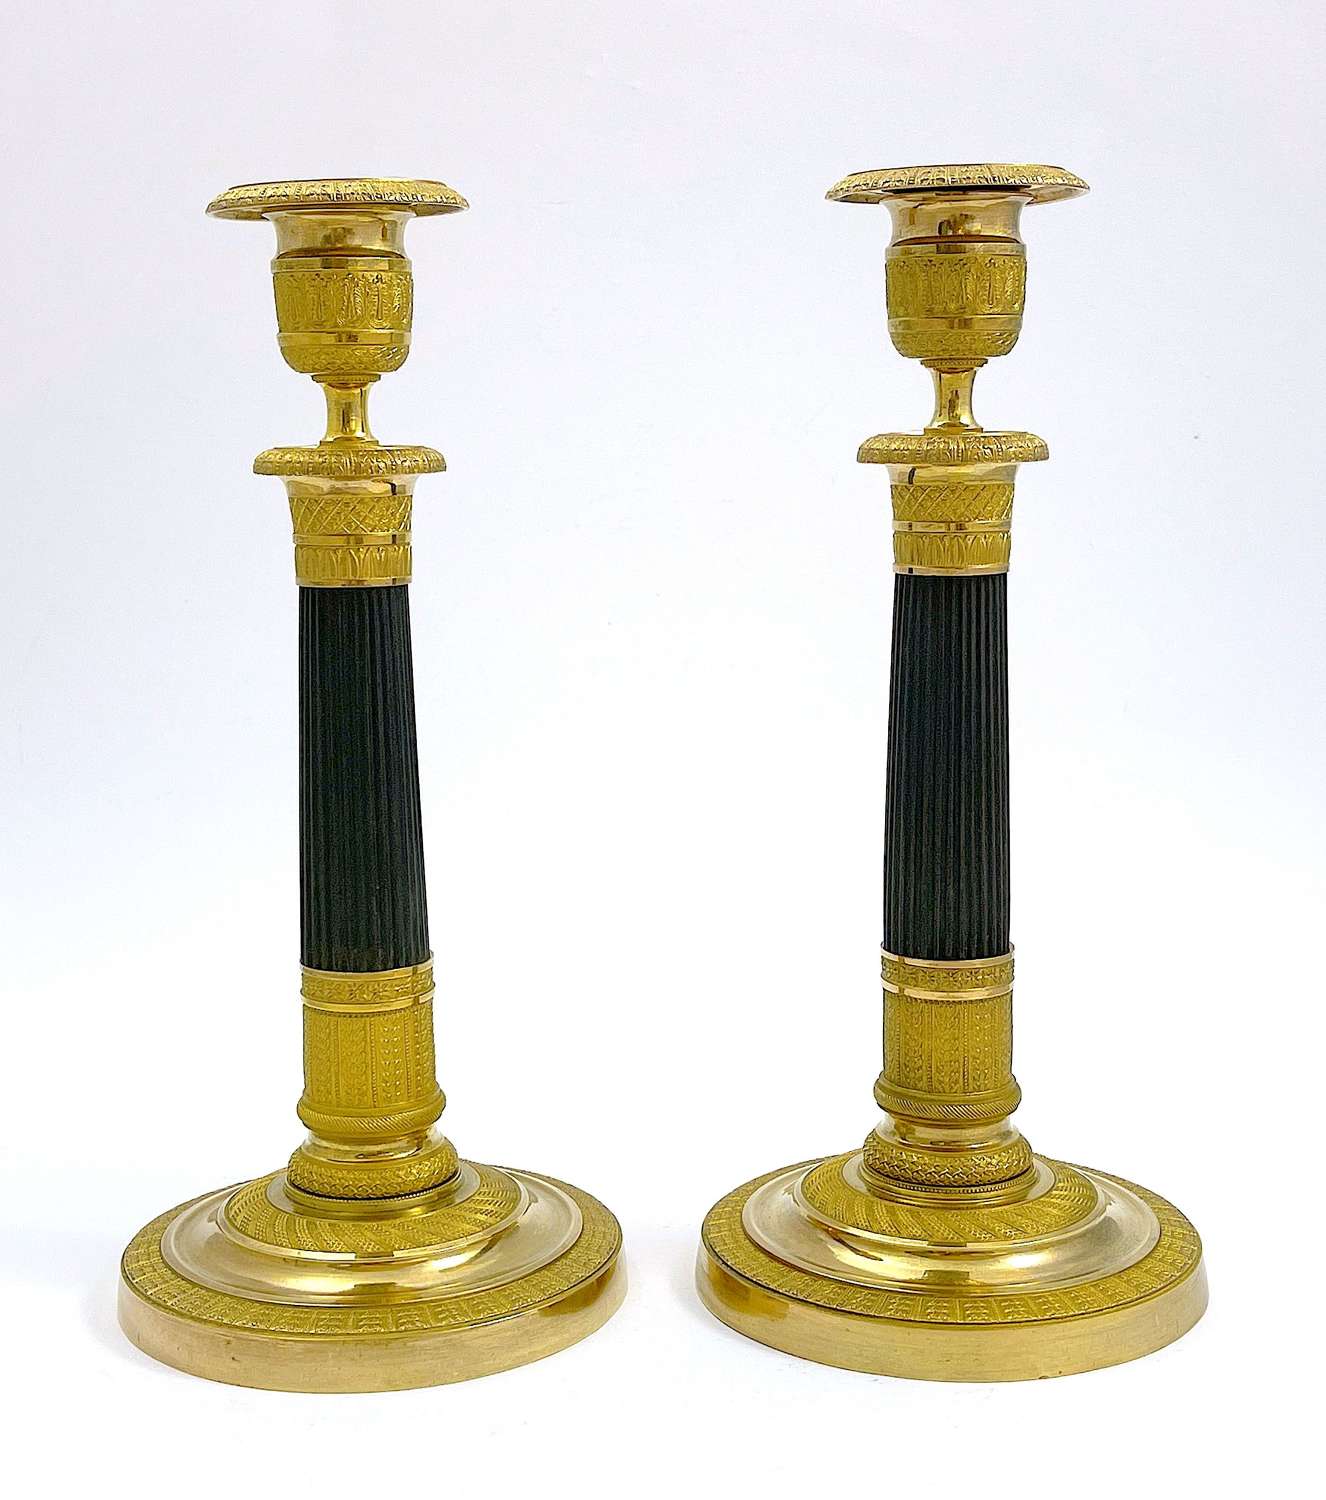 A Fine Pair of French Empire Parcel Gilt and Bronze Candlesticks